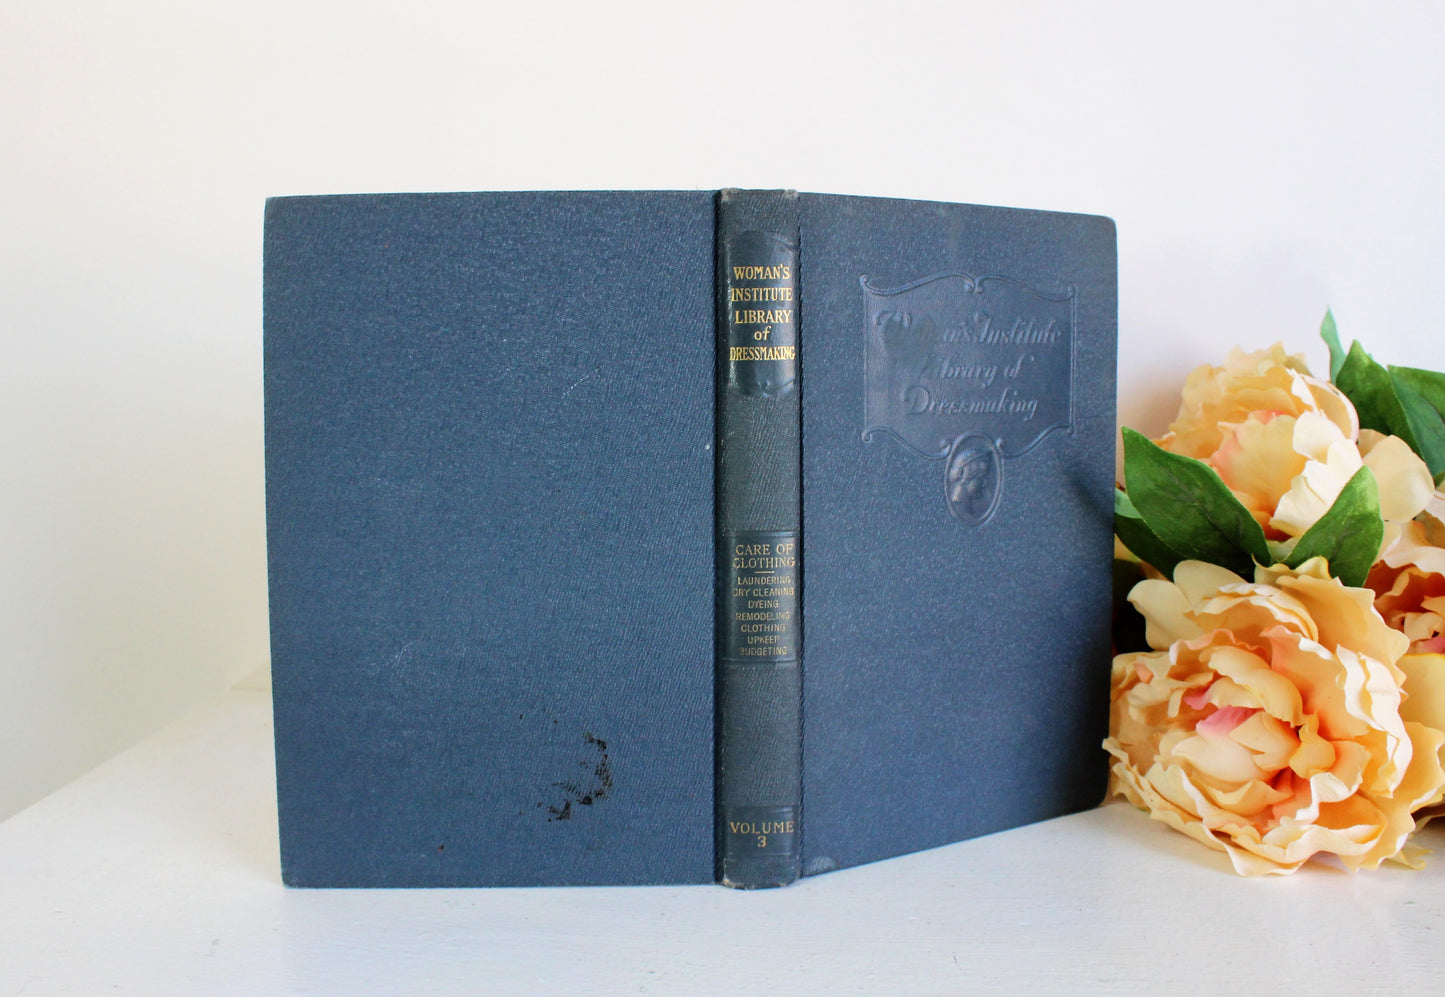 Vintage 1920s Book, Care of Clothing, Women's Institute of Dressmaking, Volume 3